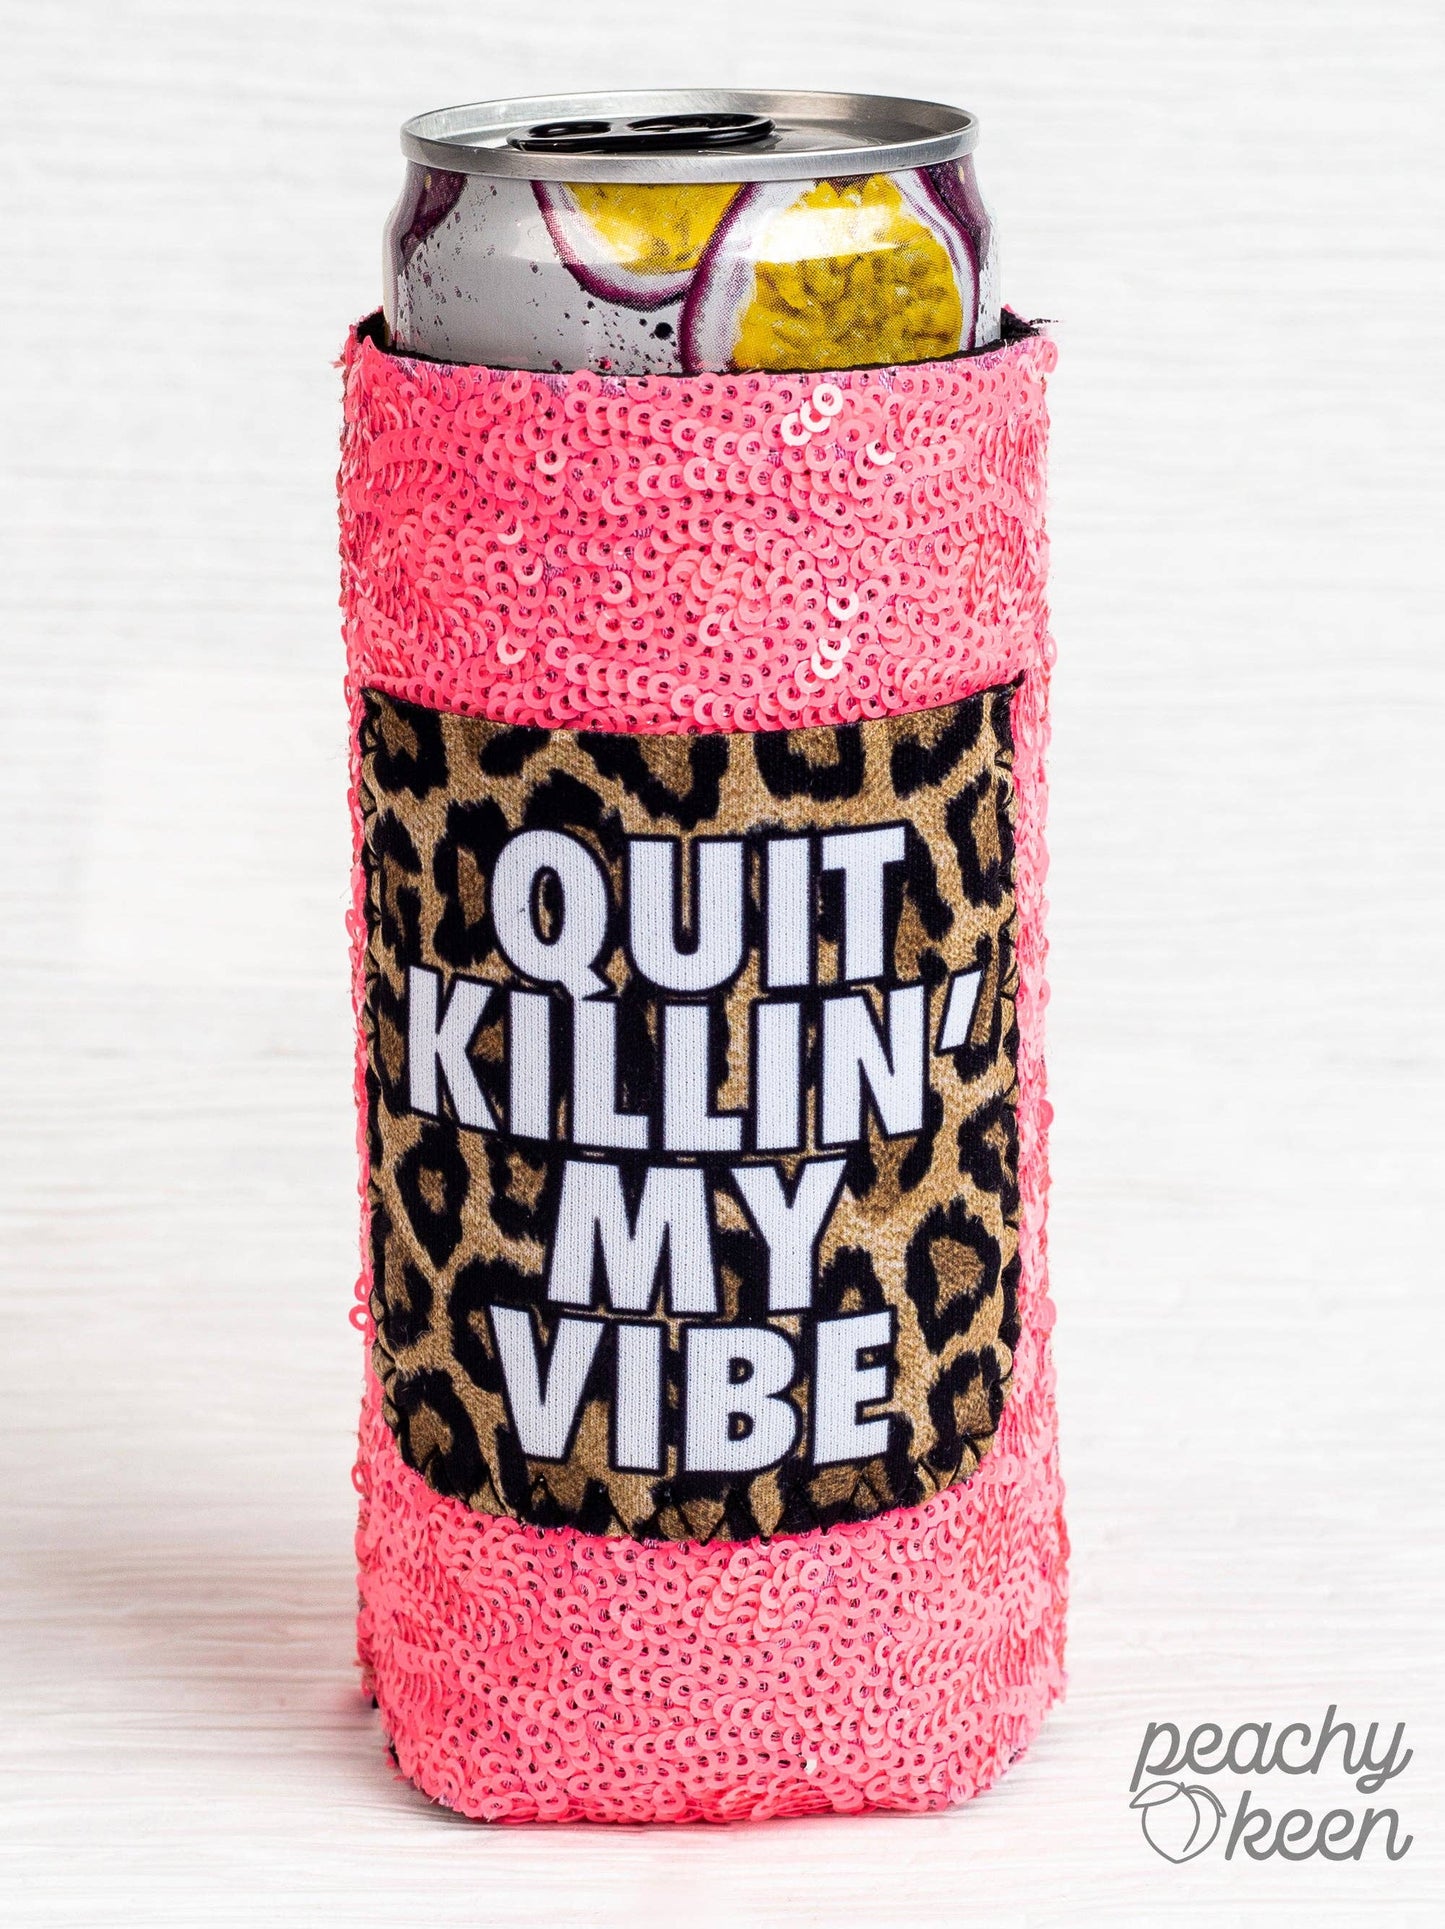 Quit Killin' My Vibe Sequin Slim Can Cooler